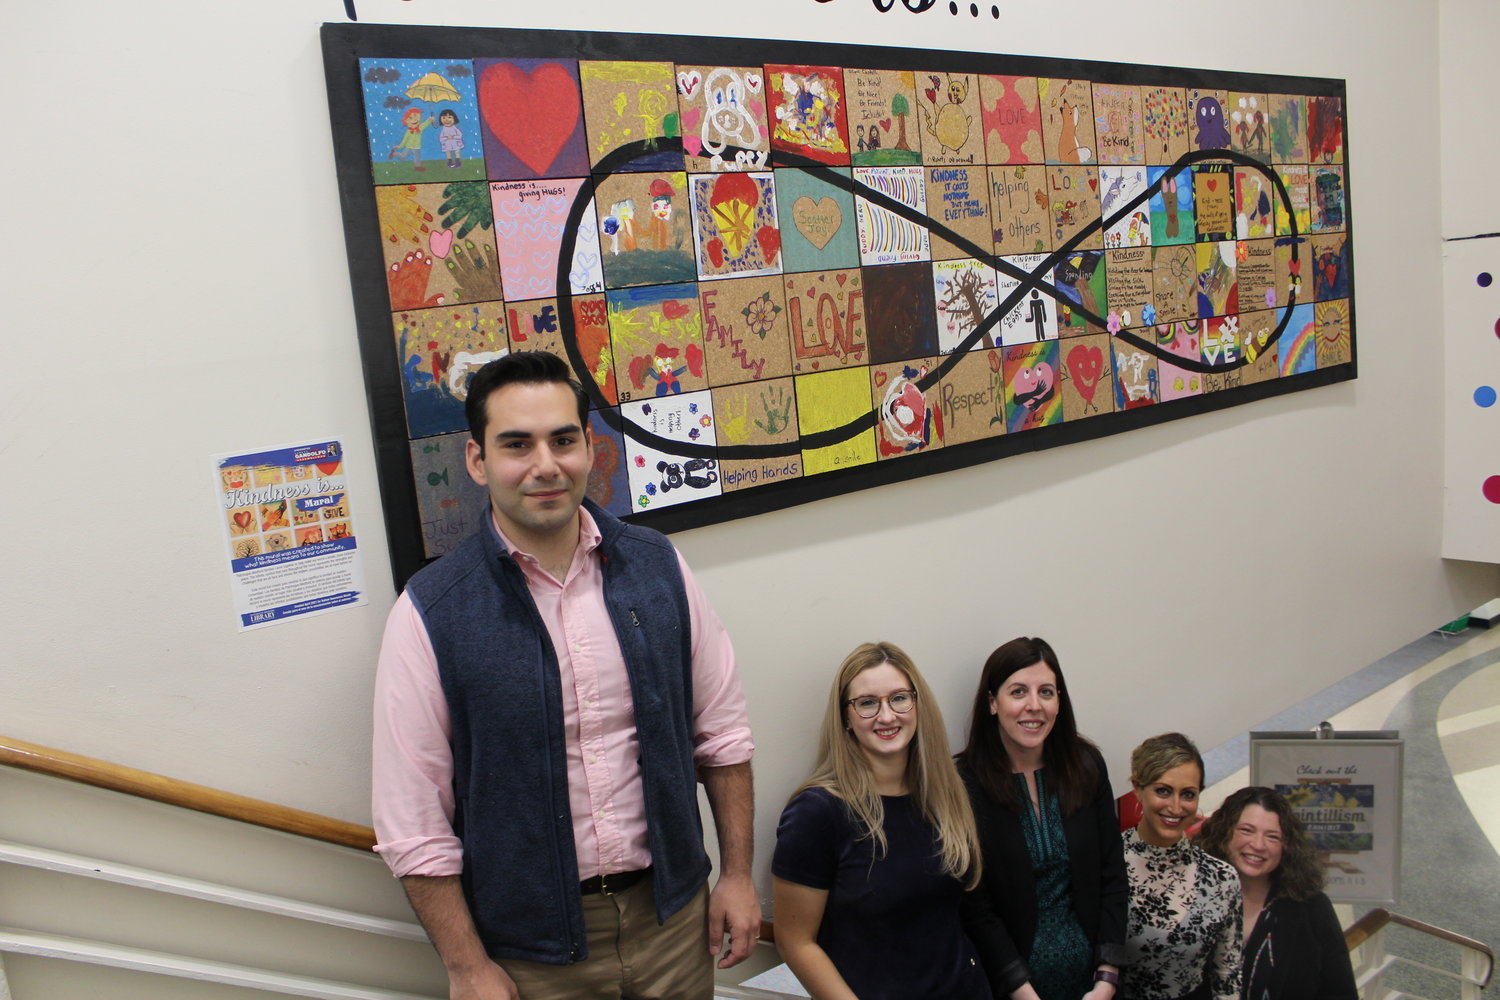 Assemblyman Jarett Gandolfo, children services librarian Olivia Manghini, special education coordinator Joyce Thompson-Haas, community relations manager Michelle Cayea, and library director Danielle Paisley stand in front of the Patchogue-Medford Library’s “Kindness Is” mural.